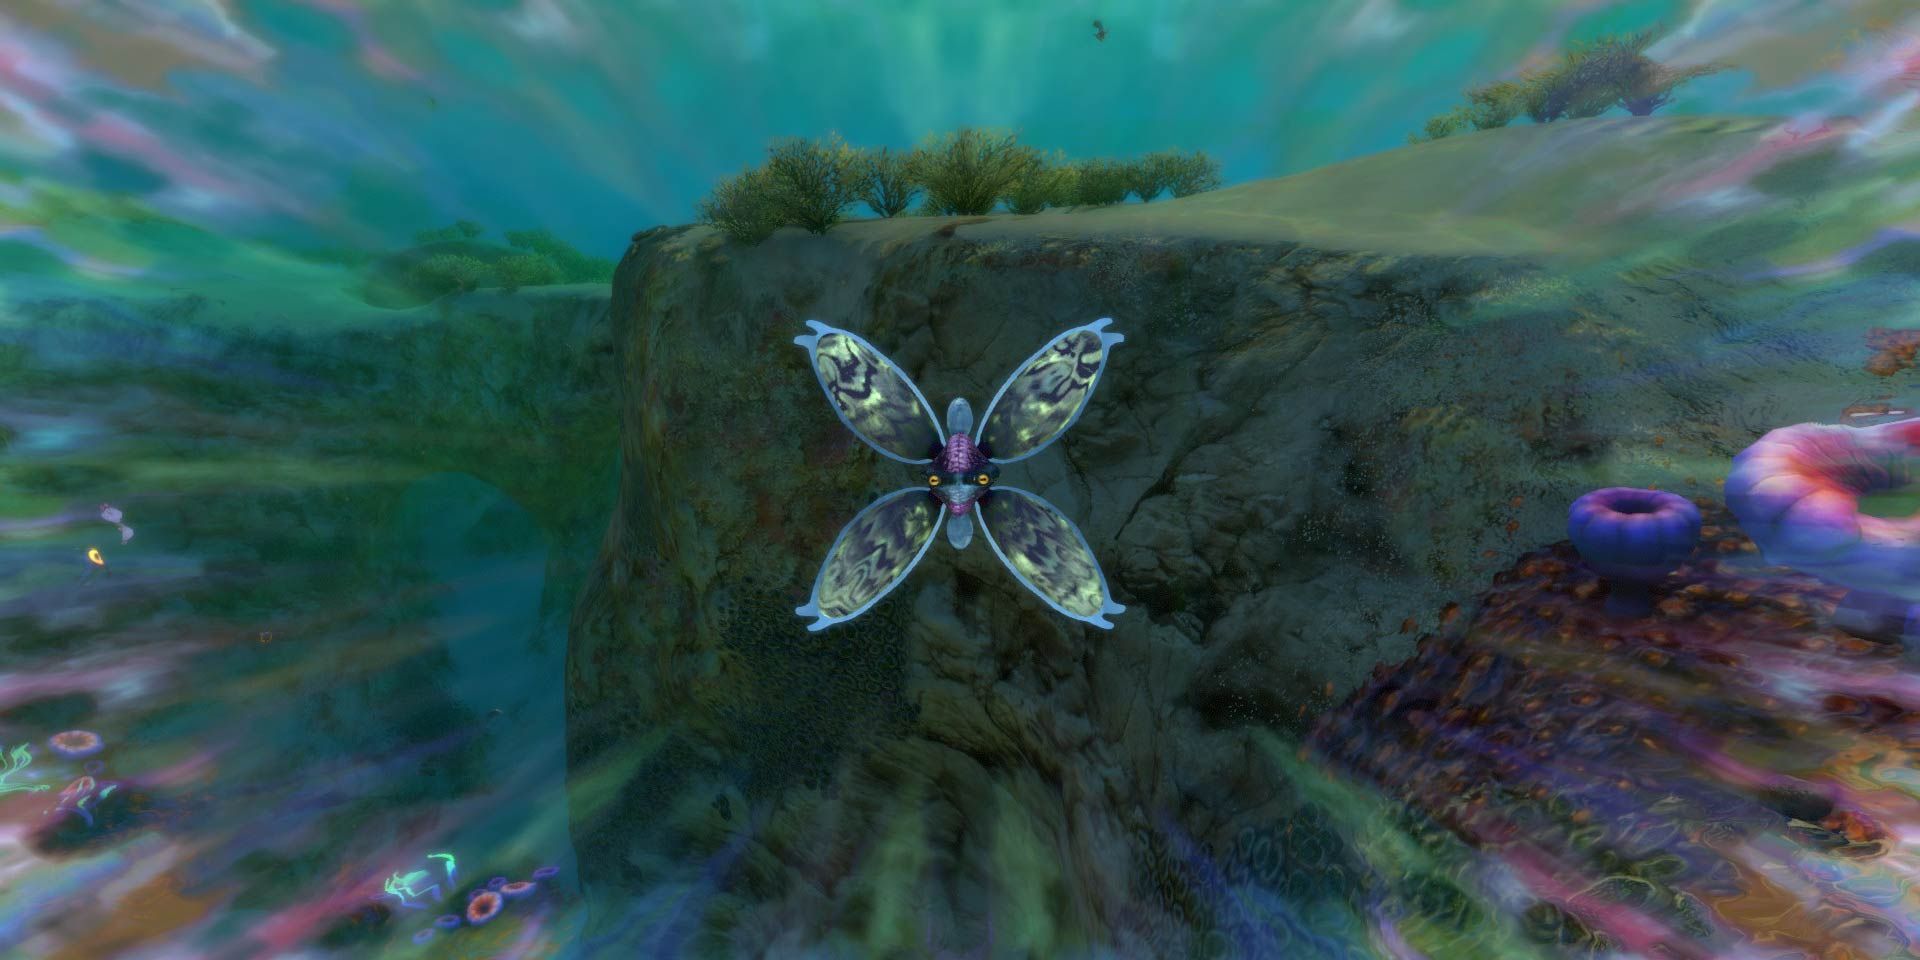 A Mesmer hypnotizing the player in Subnautica.